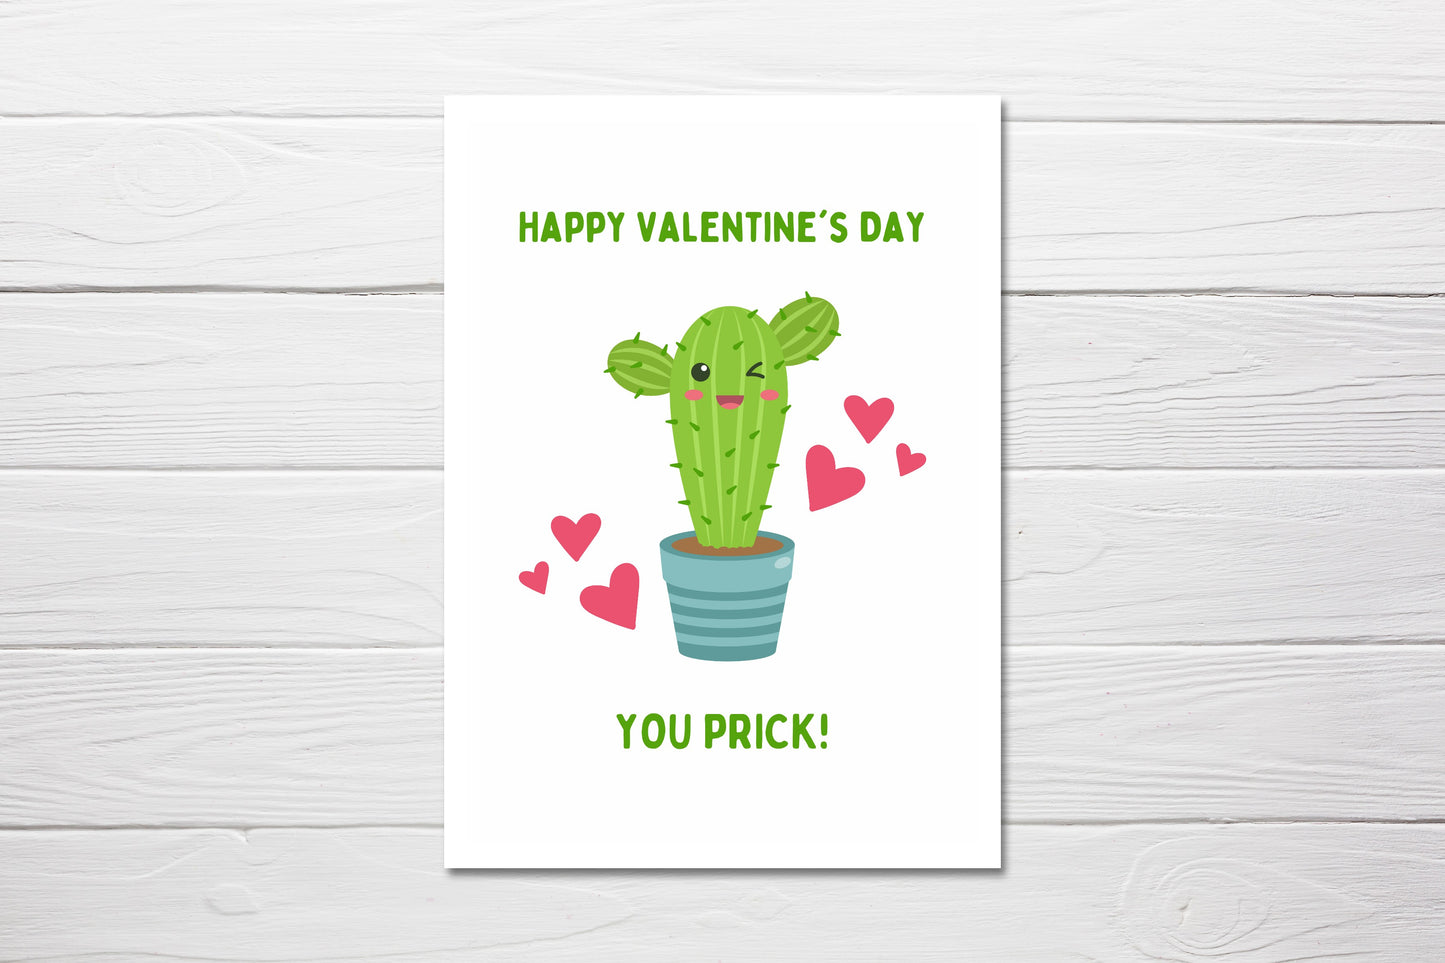 Valentines Card | Happy Valentine's Day You Prick | Funny Card | Joke Card | Couples Card